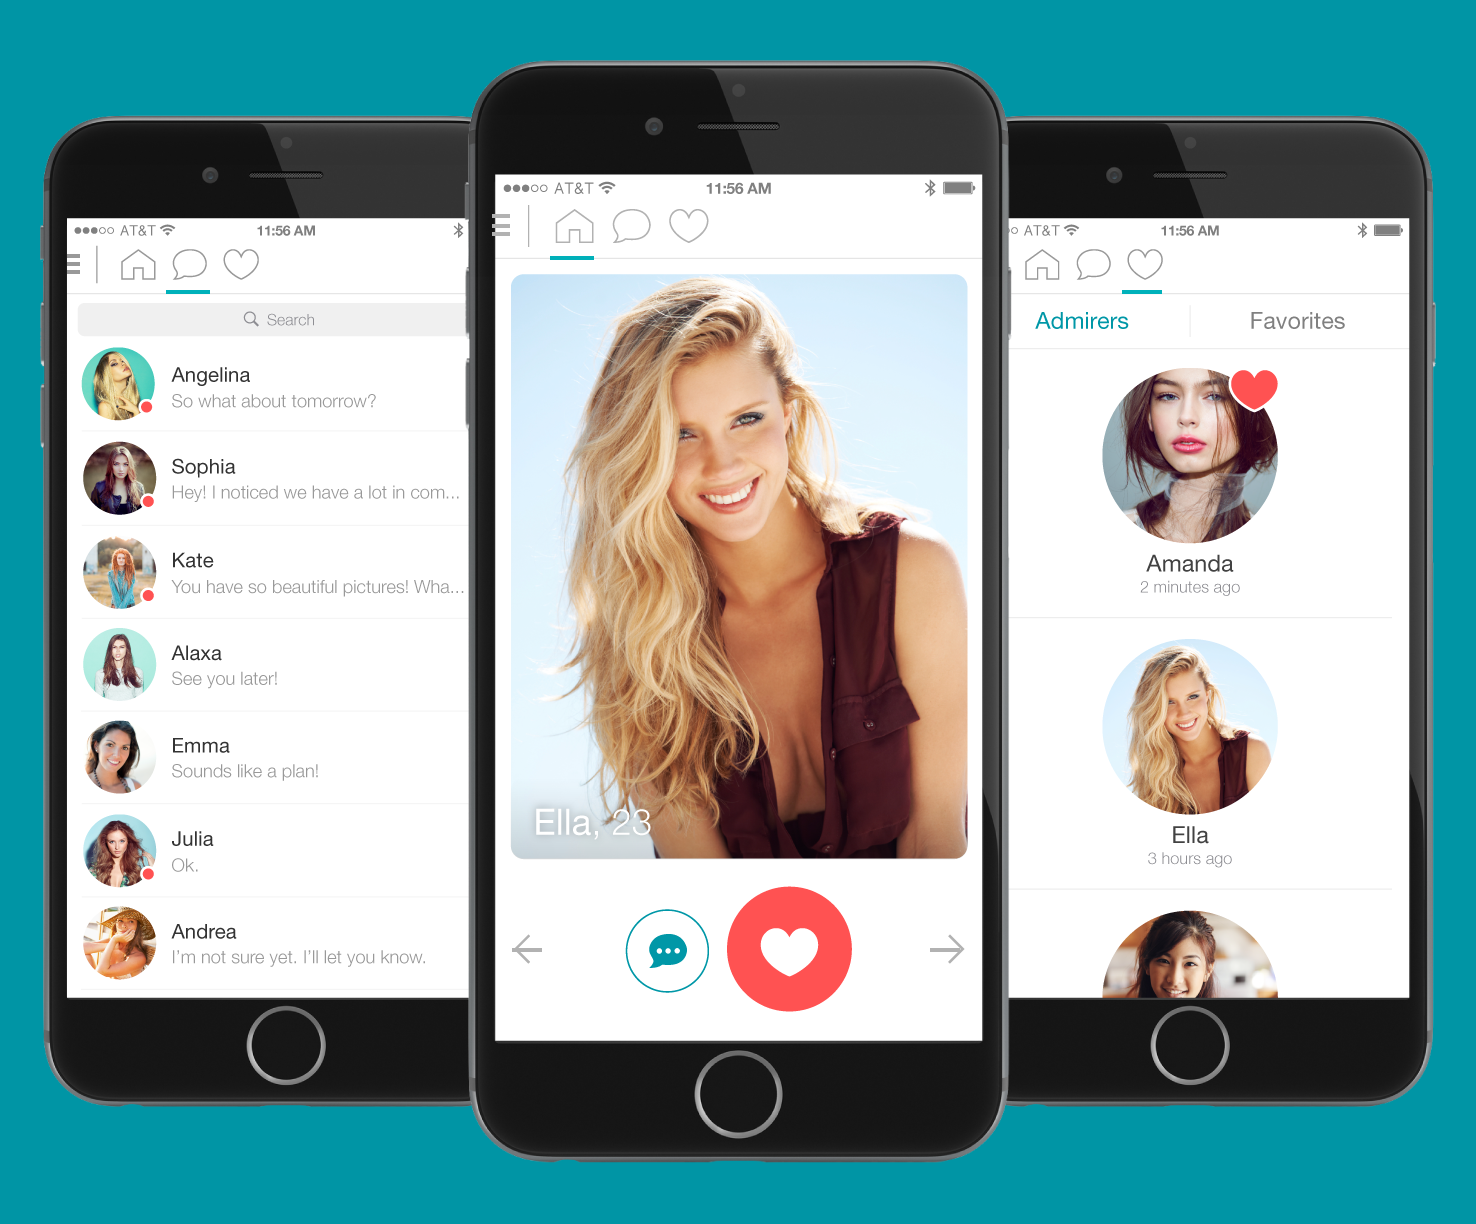 Ask.fm founders back dating app Mint.